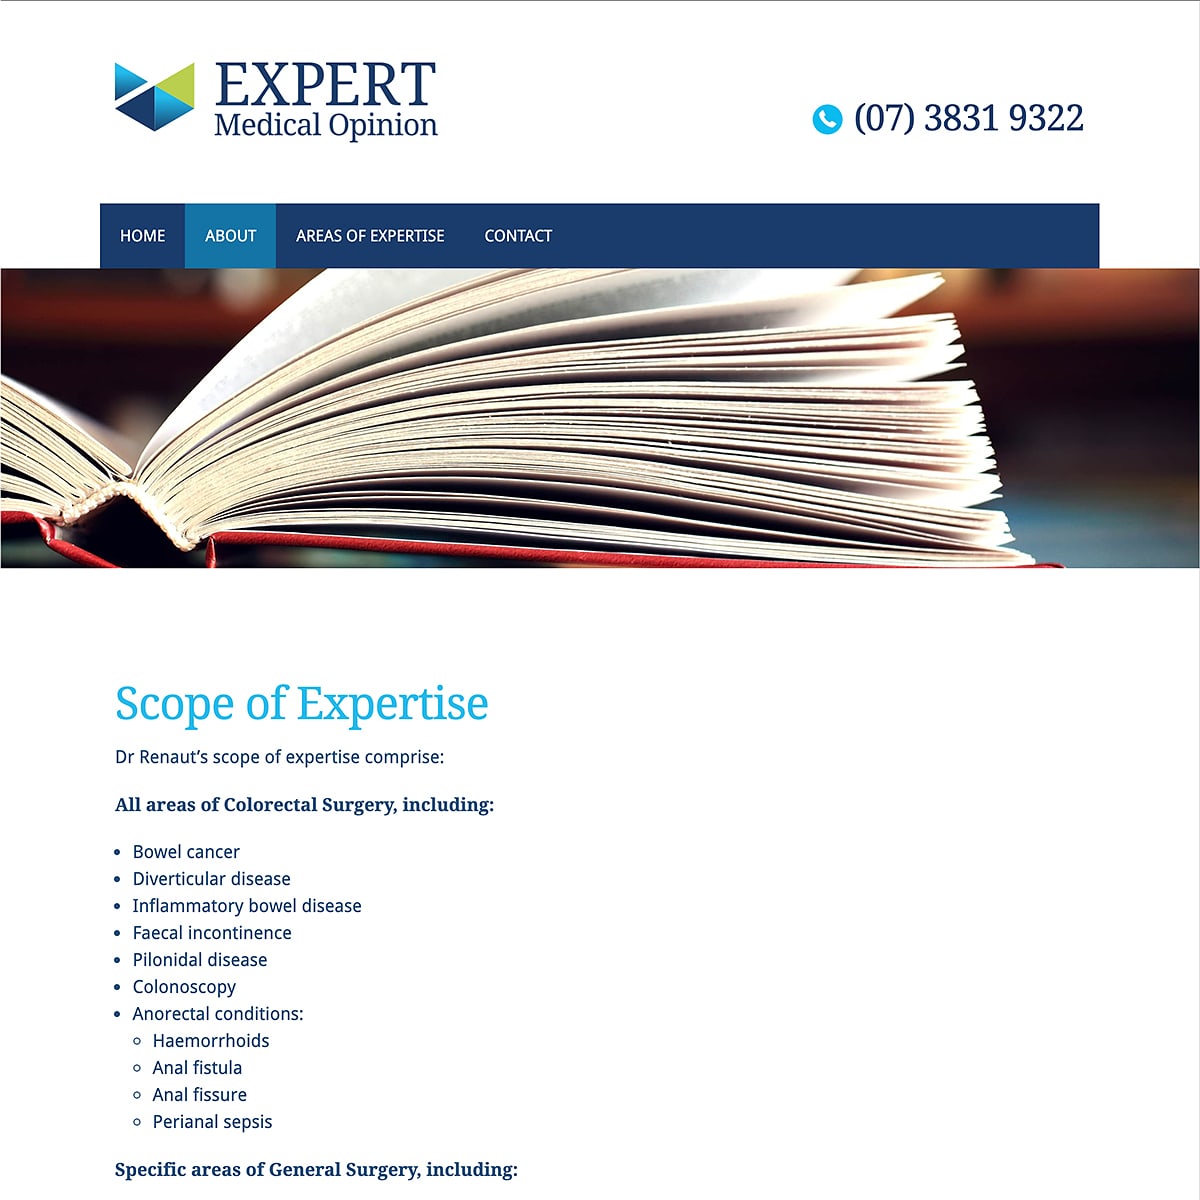 Expert Medical Opinion - Scope of Expertise